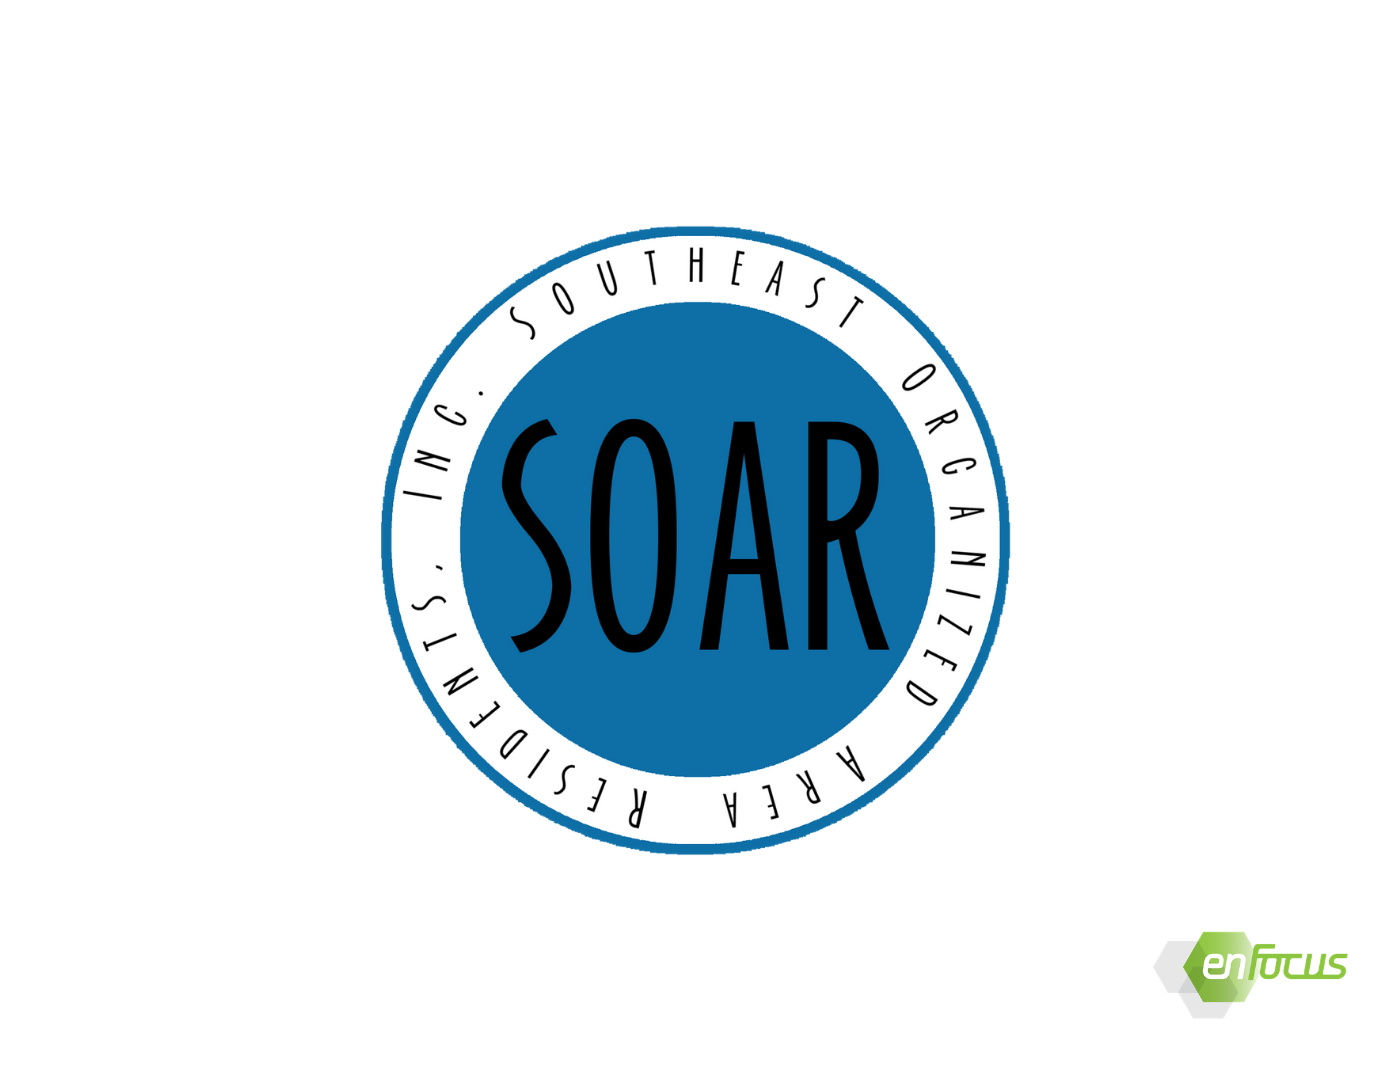 SOAR Partners with enFocus to Improve Neighborhood Digital Literacy and Increase Civic Engagement